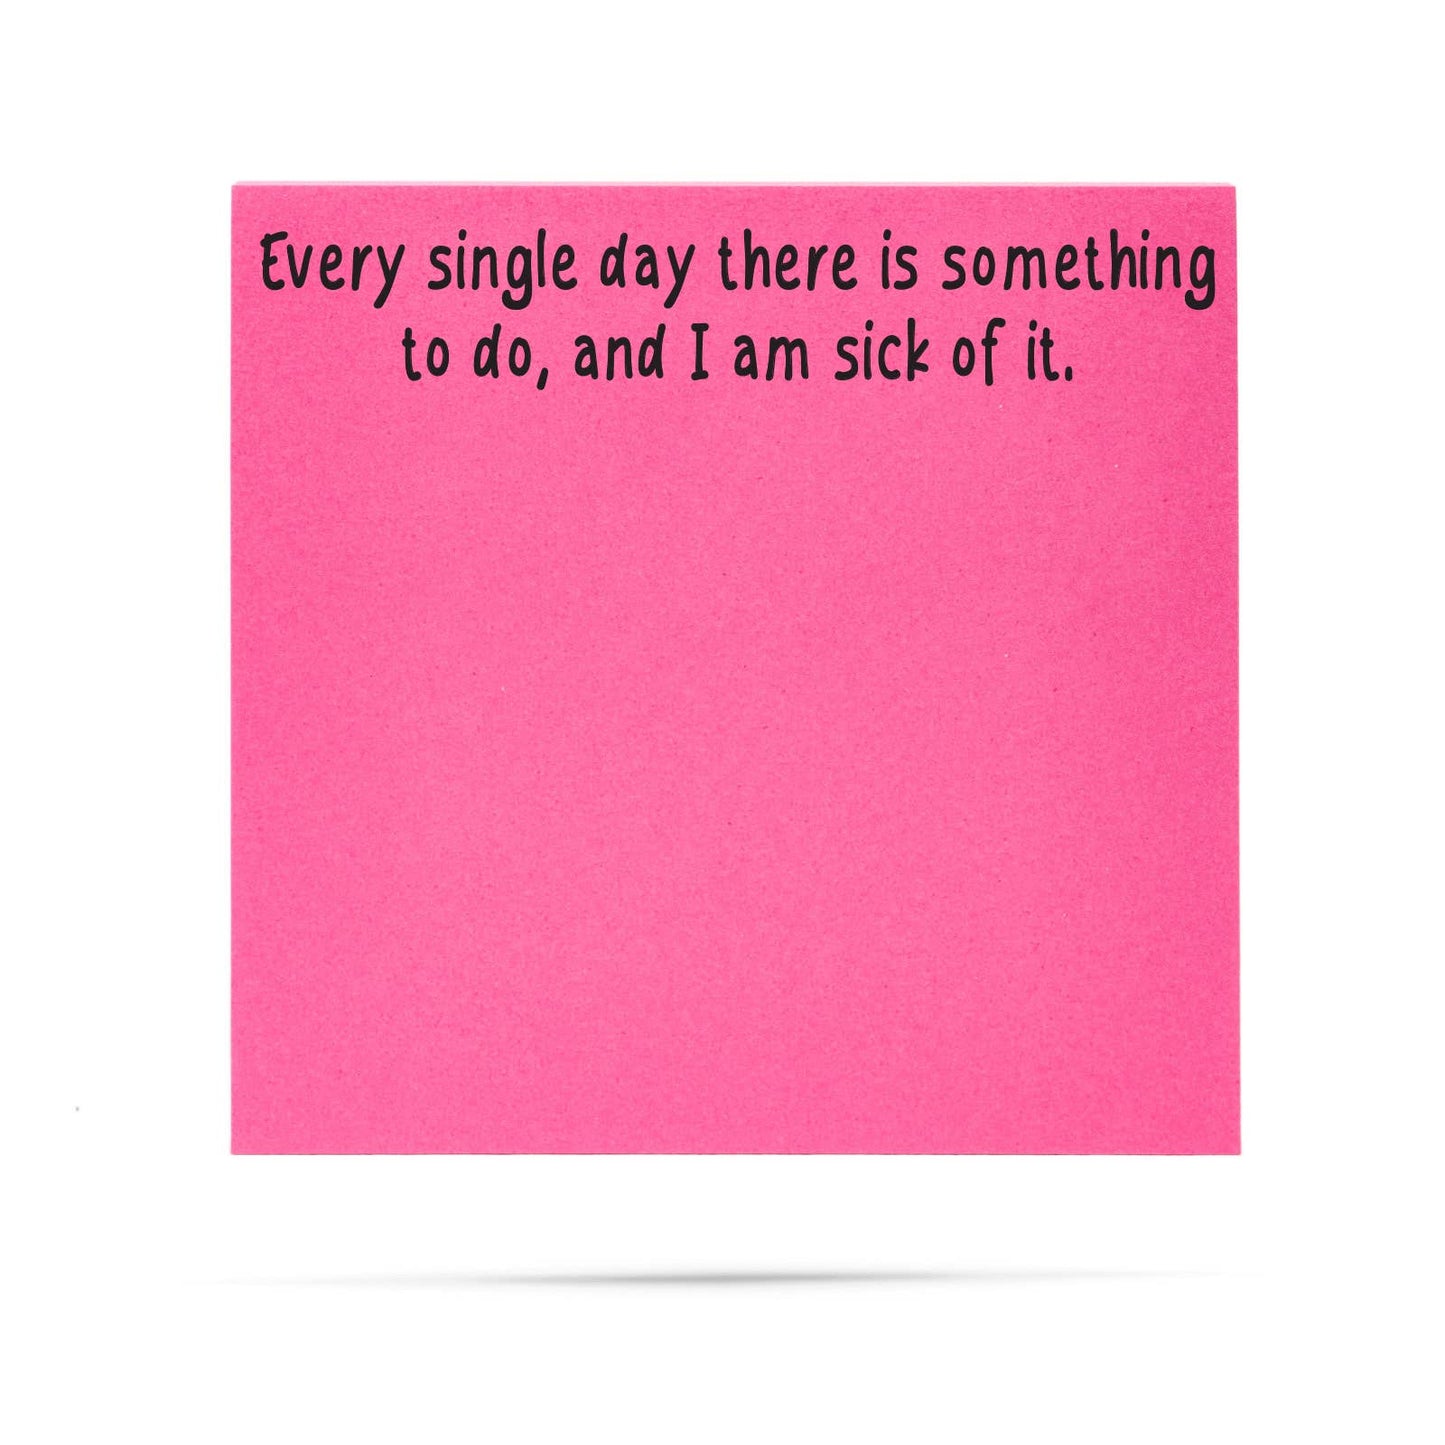 Every single day there is - Sticky Notes